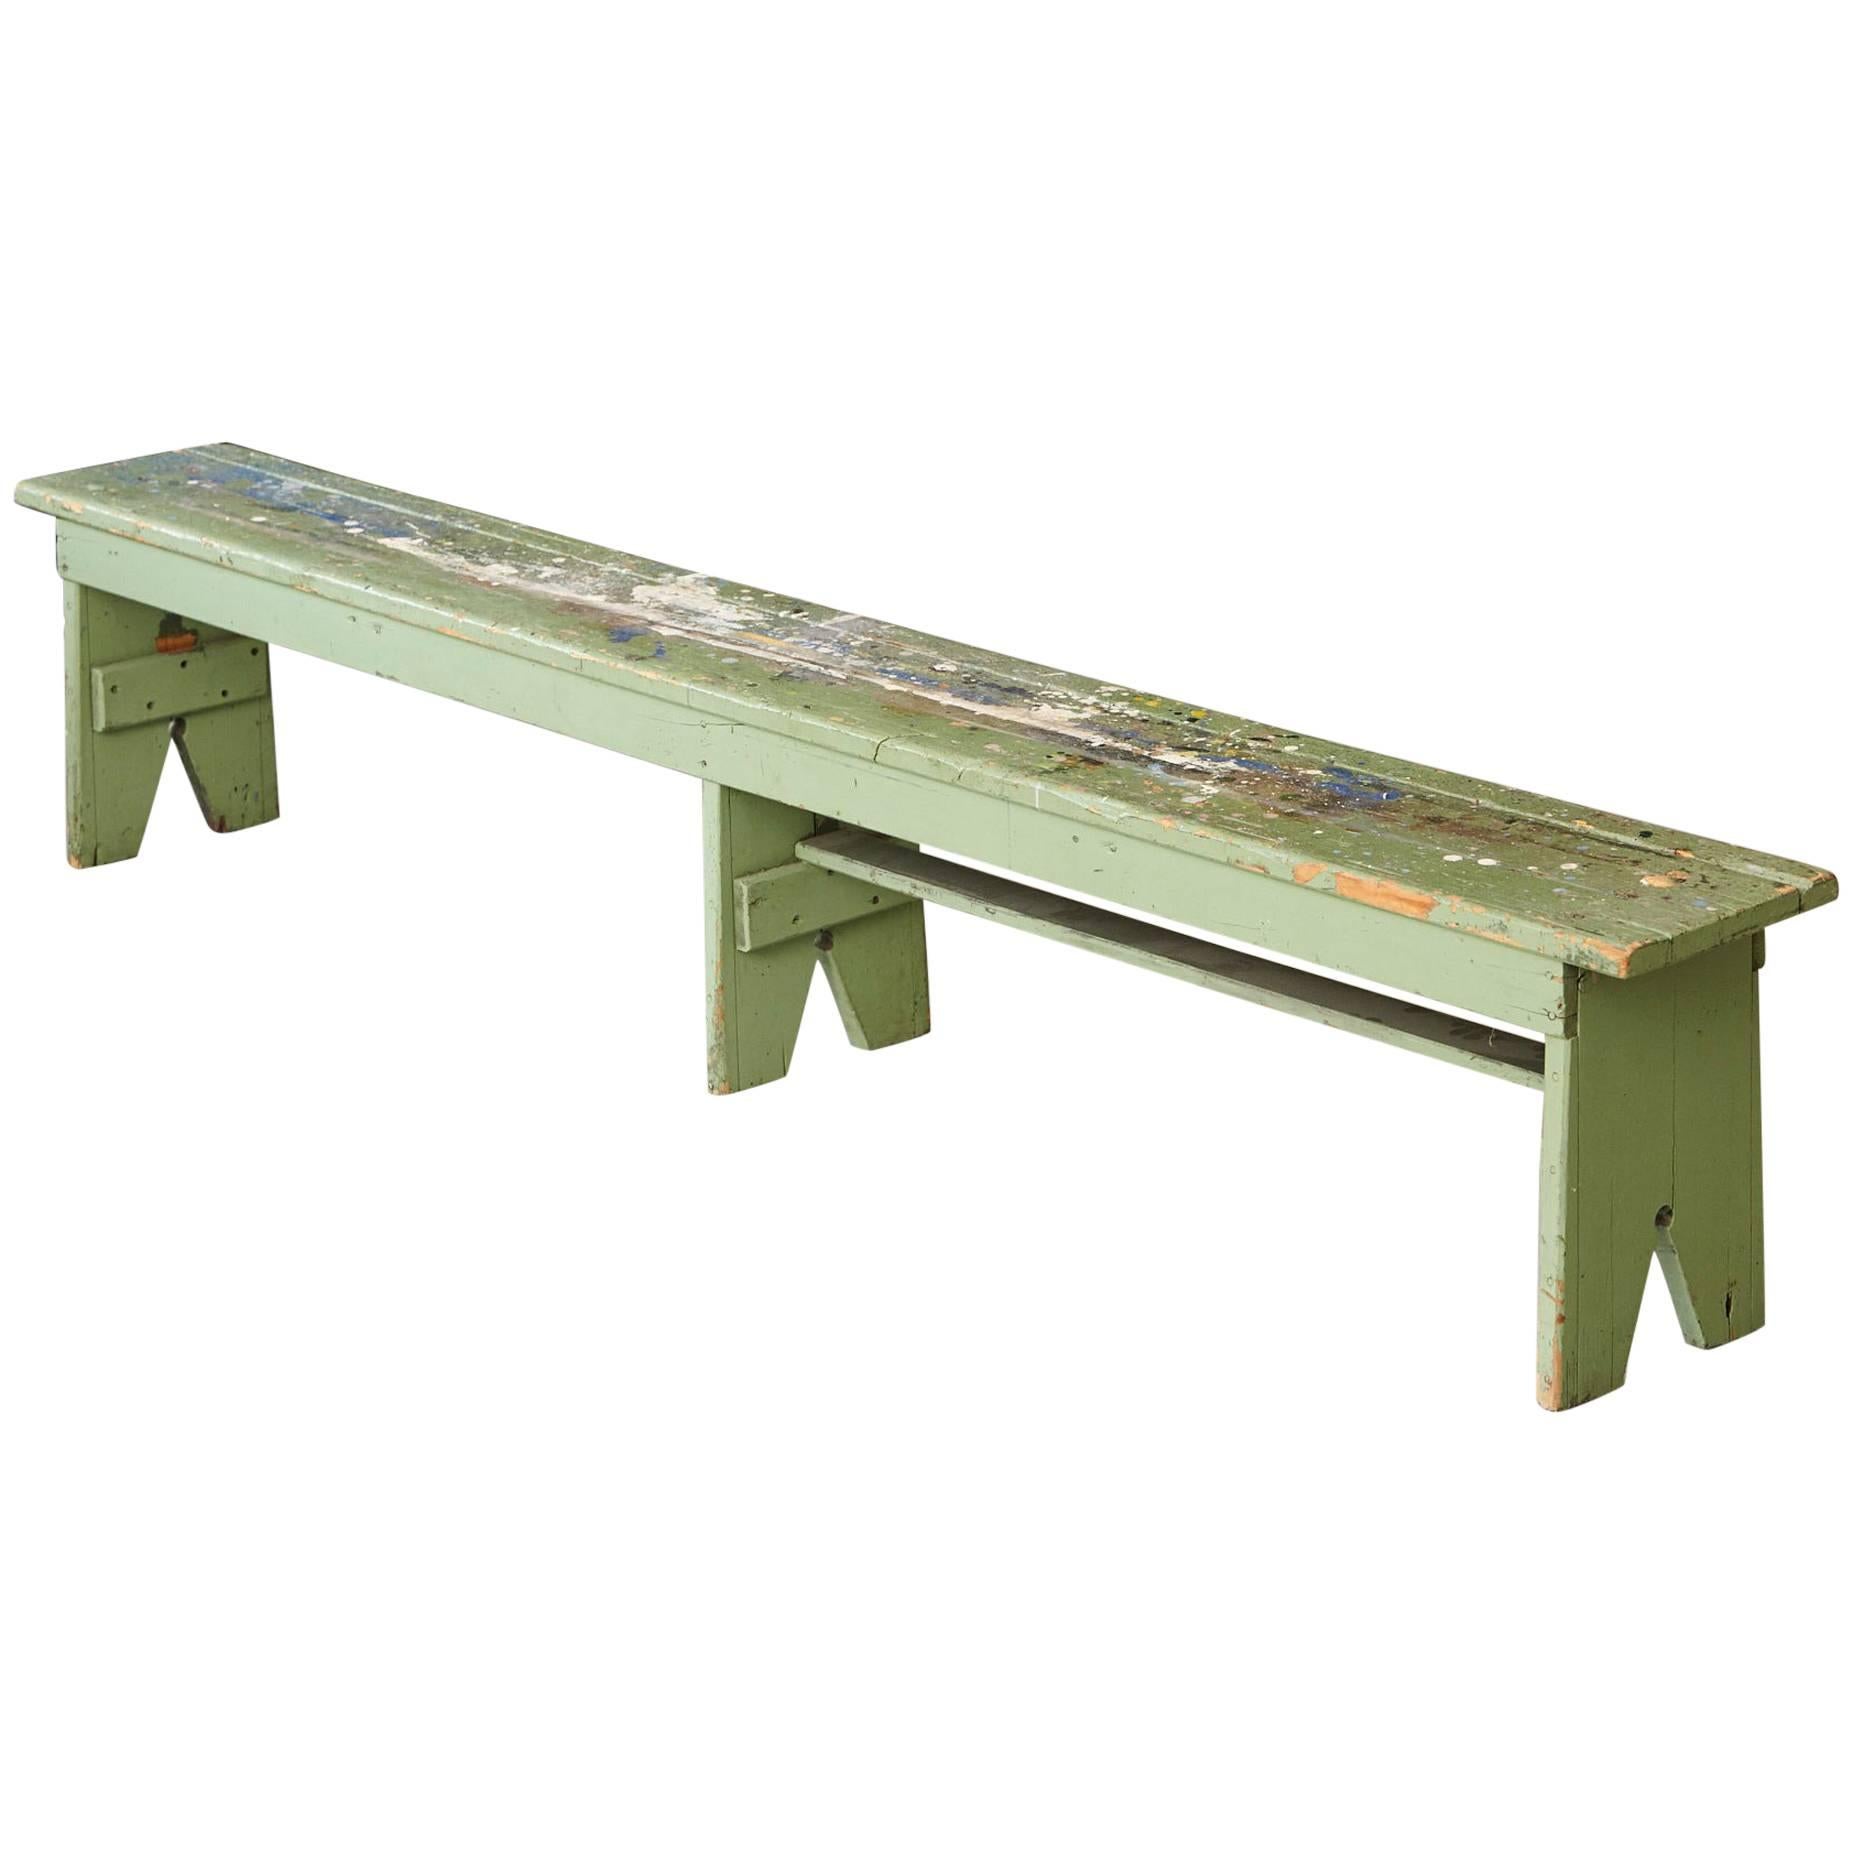 Primitive Green Pine Bench with Lots of Color Splashes from an Artist's Atelier